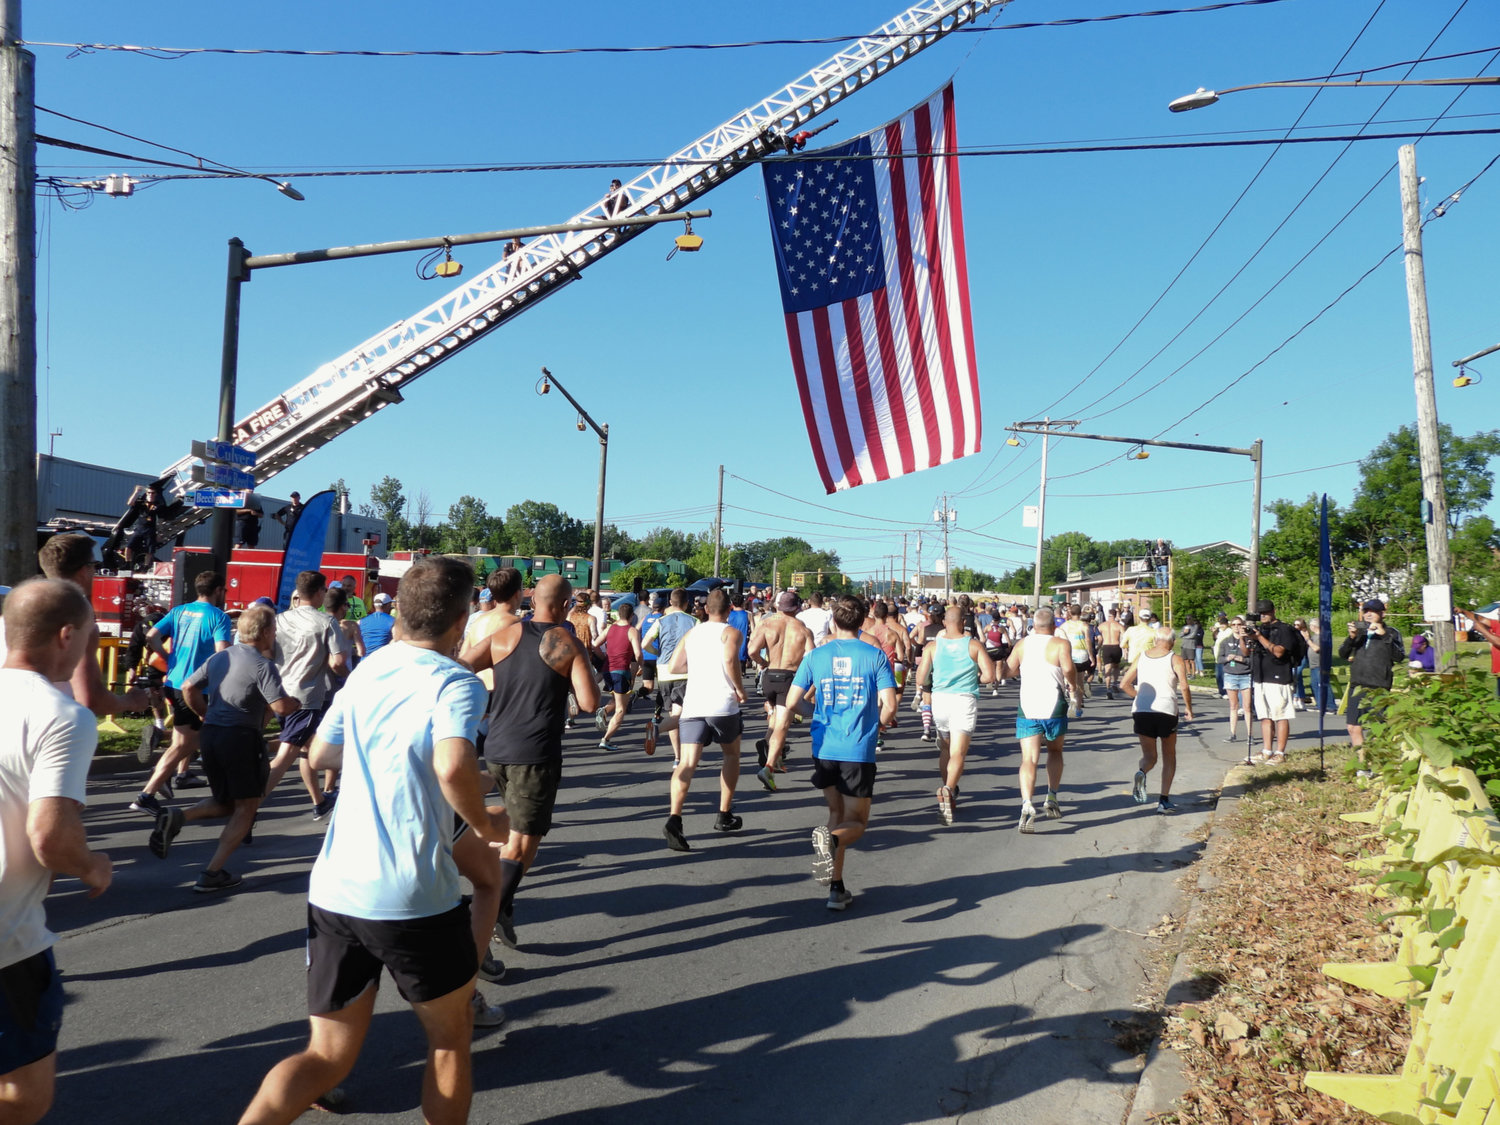 Runners take off for the 45th Boilermaker Road Race on Sunday, July 10 in Utica.